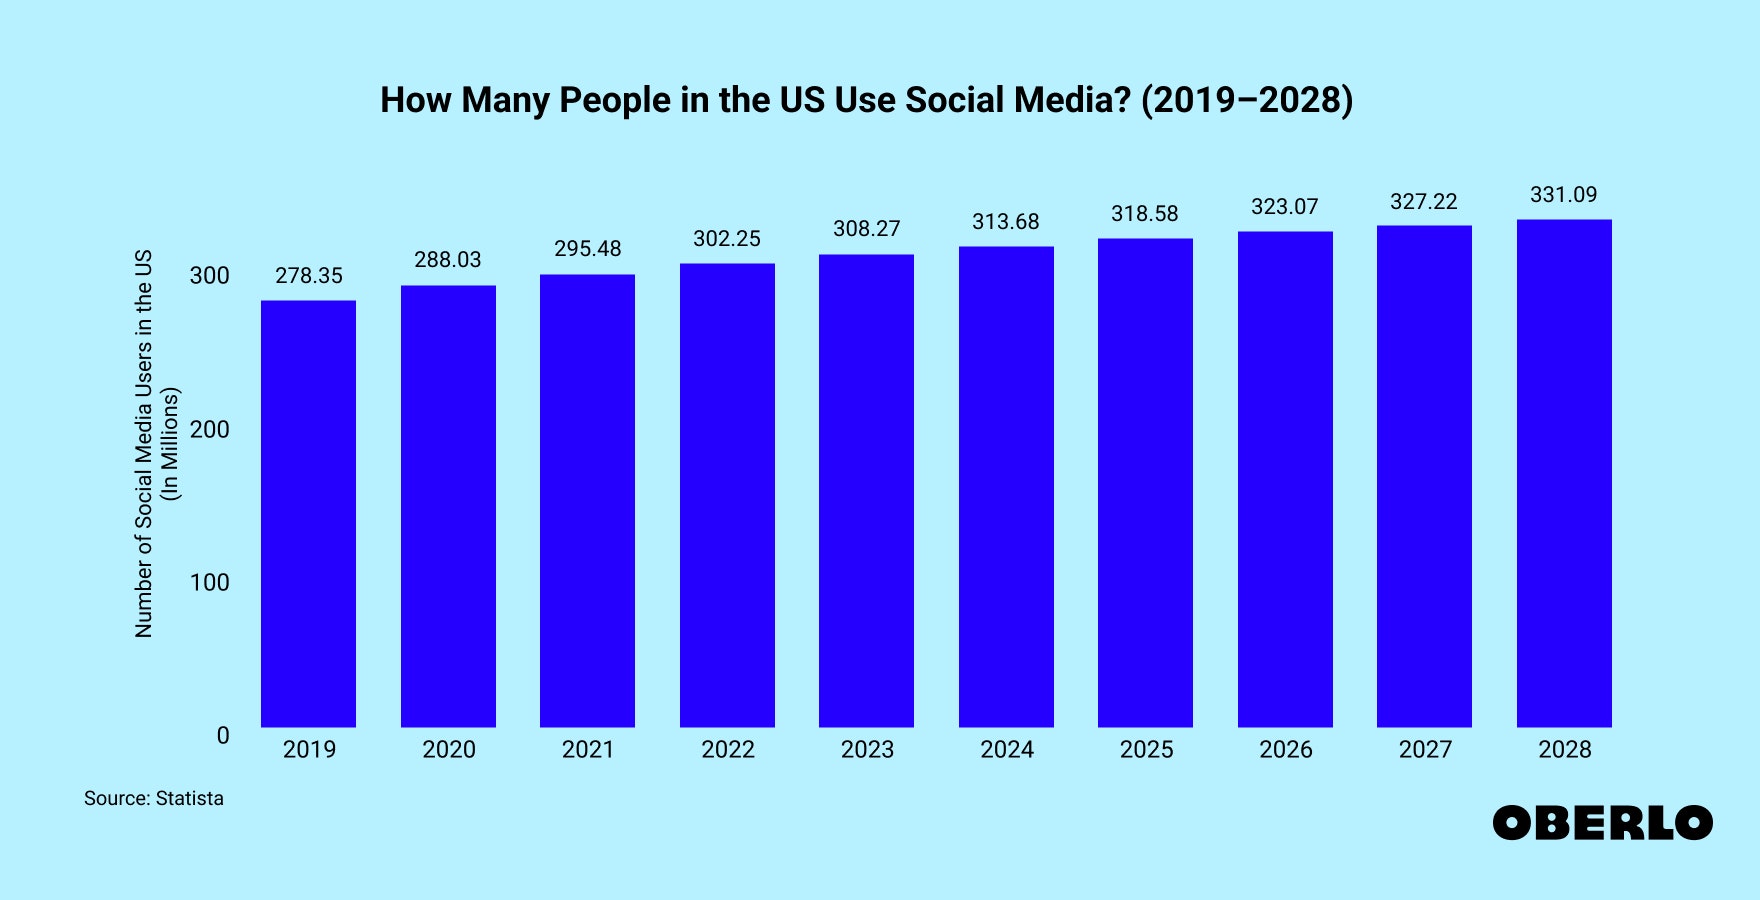 Chart showing the number of social media users in the US